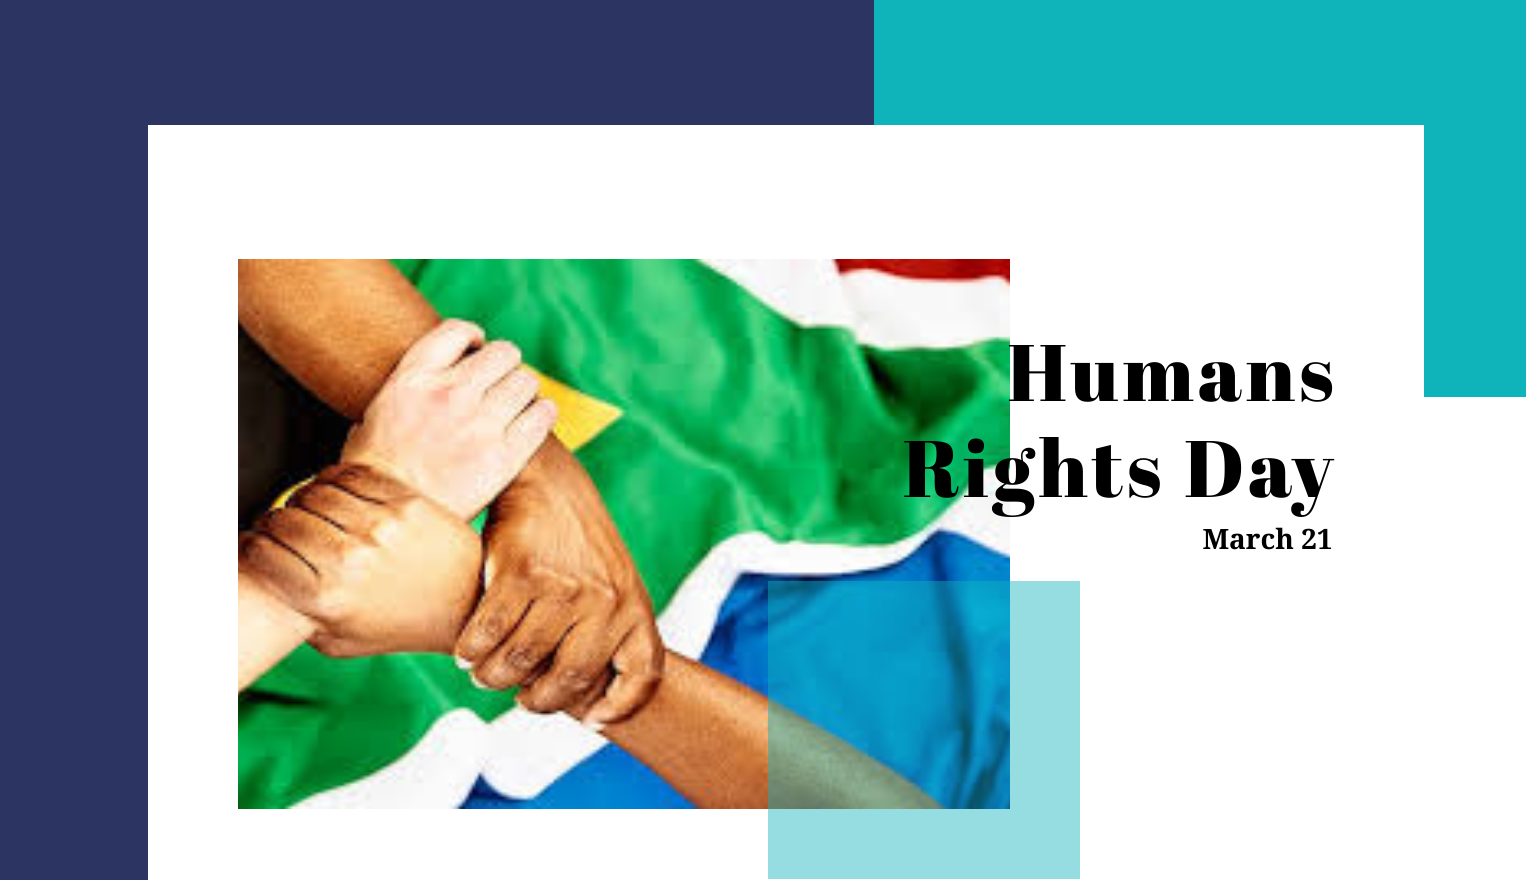 https://sihma.org.za/photos/shares/Human Rights Day Infographic.png